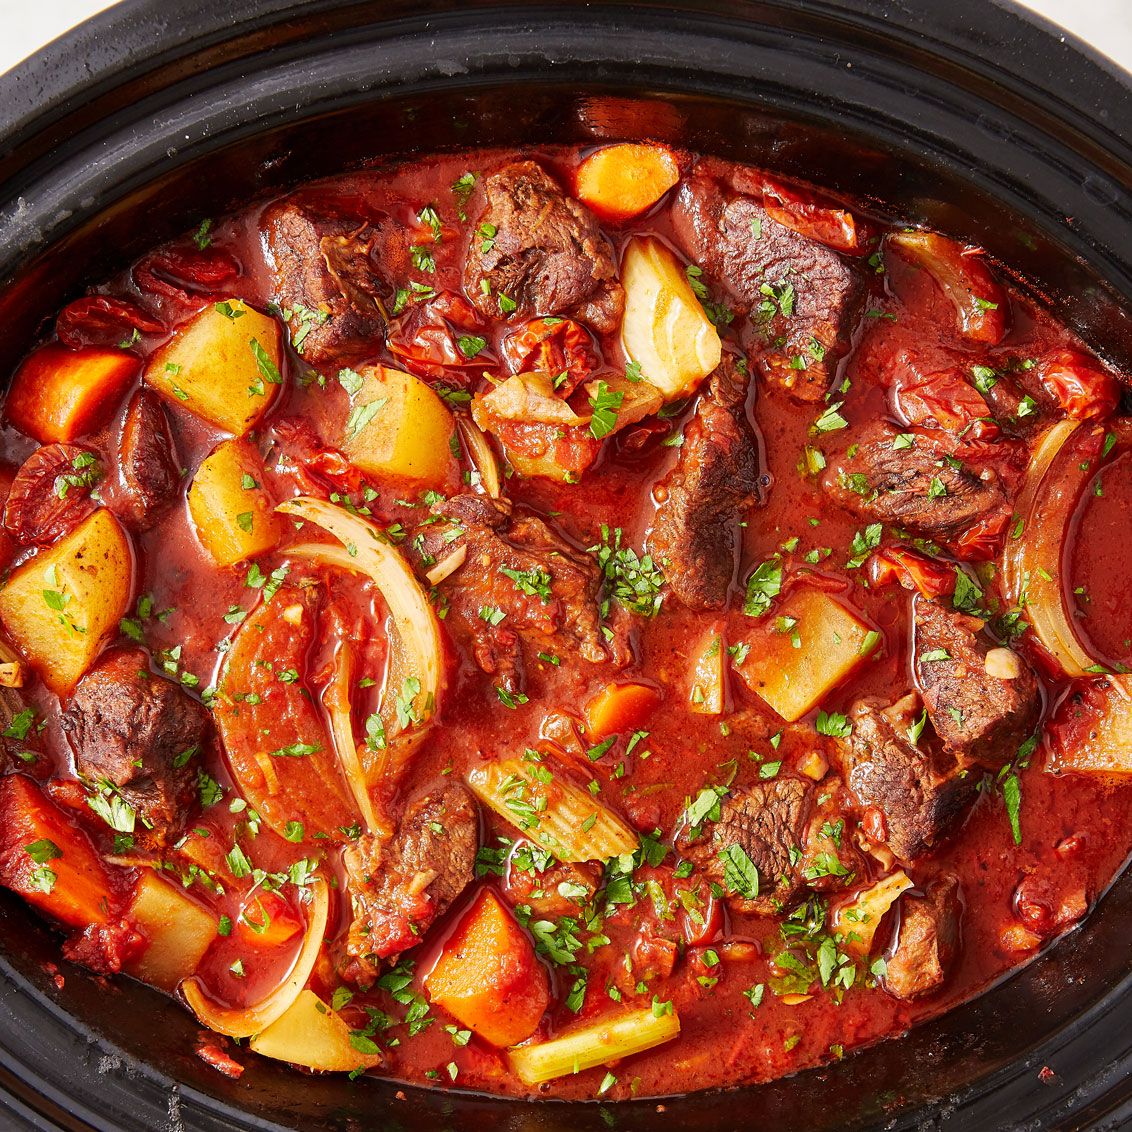 https://hips.hearstapps.com/hmg-prod/images/delish-190621-slow-cooker-beef-stew-0229-landscape-pf-1567629879.jpg?crop=0.596xw:0.894xh;0.191xw,0.0577xh&resize=1200:*